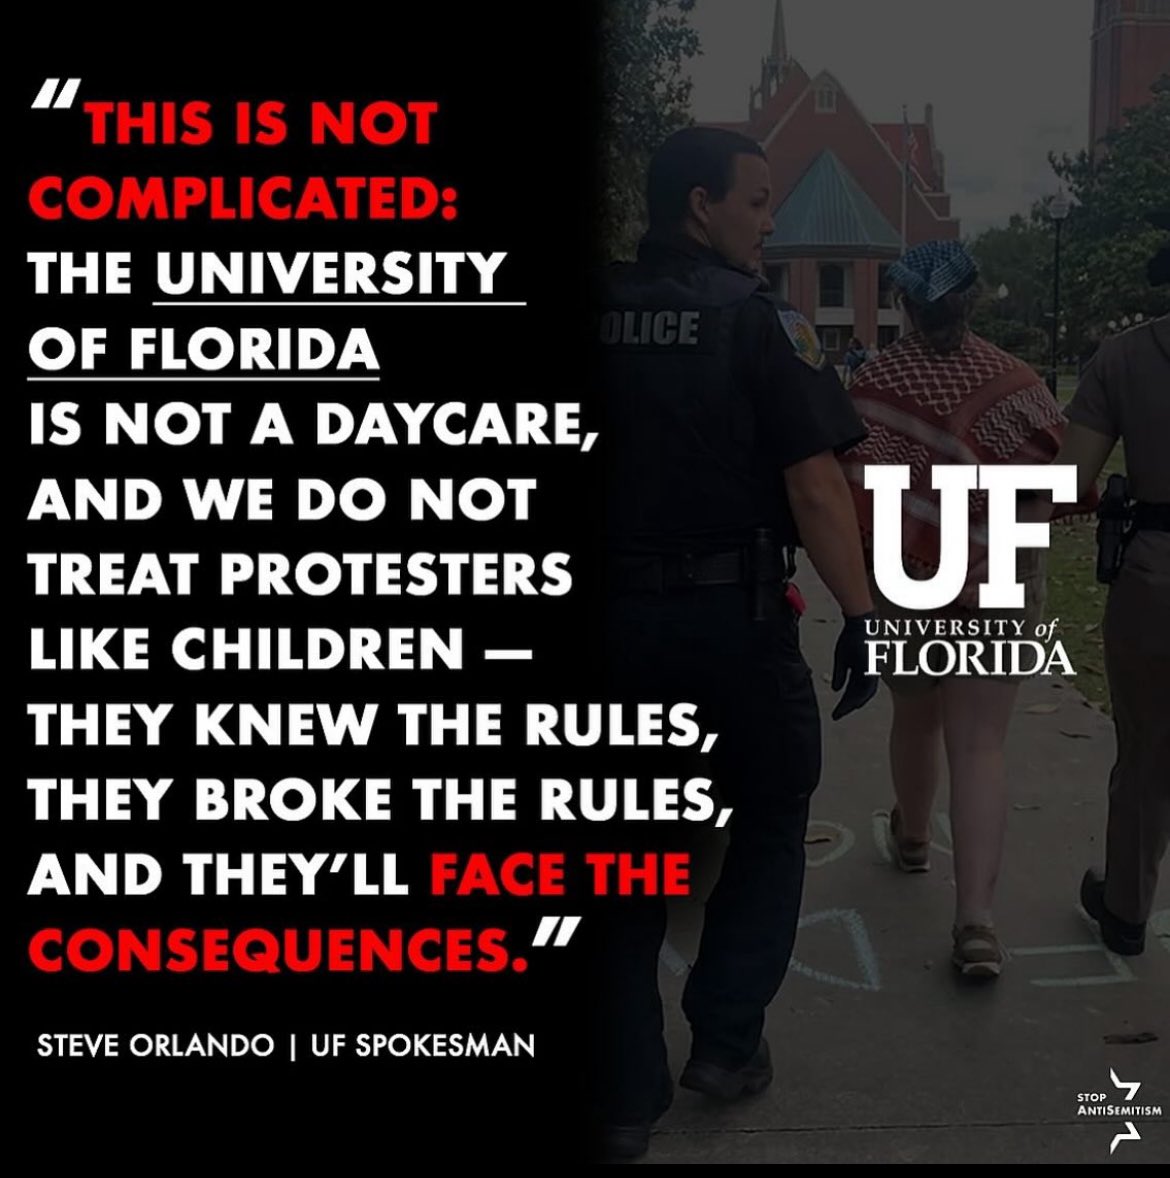 Glad to see @UF knows how to treat those who break rules. 

LifeLesson #4: Actions have consequences.